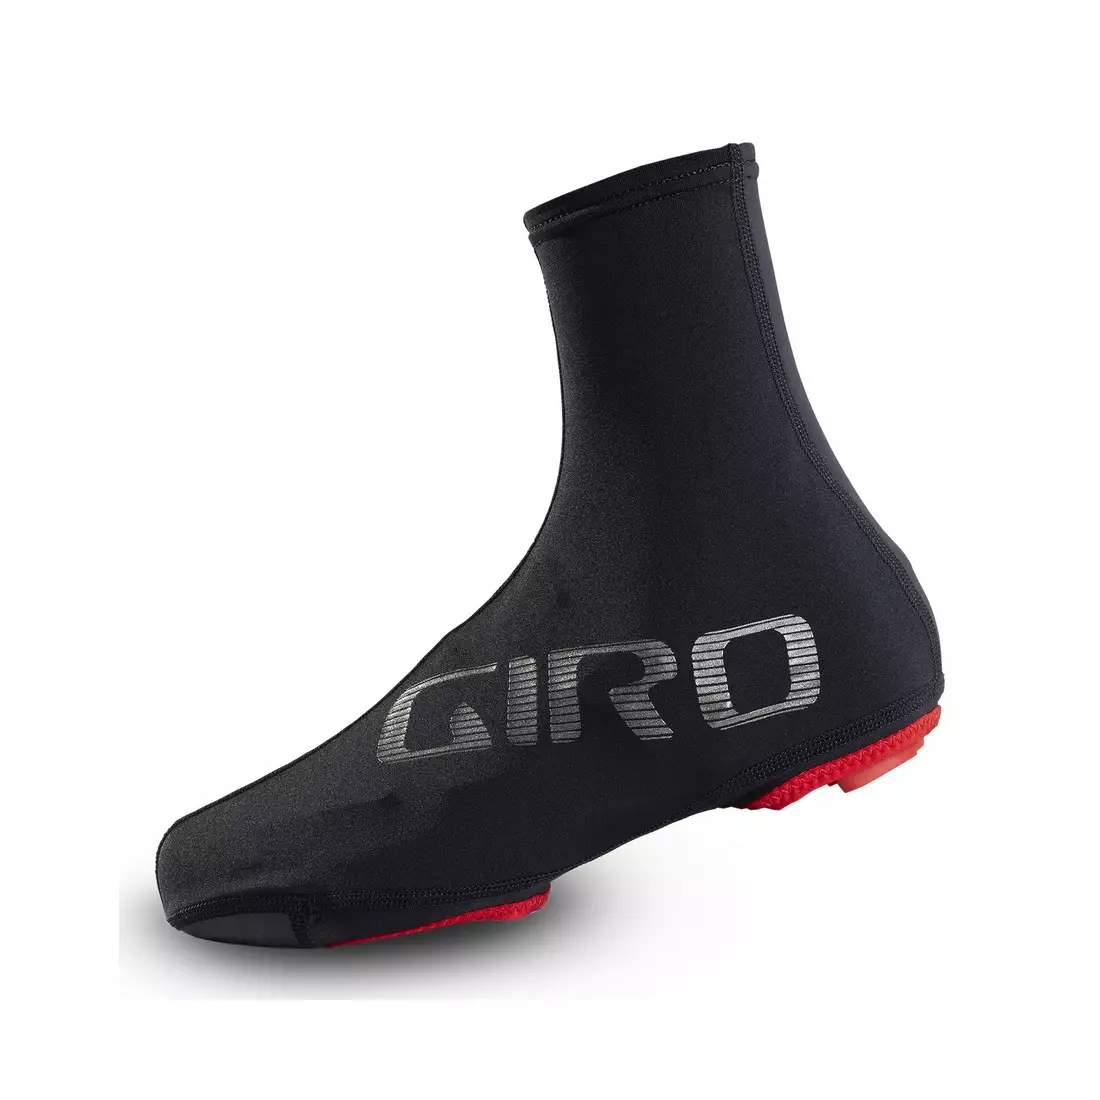 GIRO covers for bicycle shoes ULTRALIGHT AERO SHOE COVER black GR-7111999